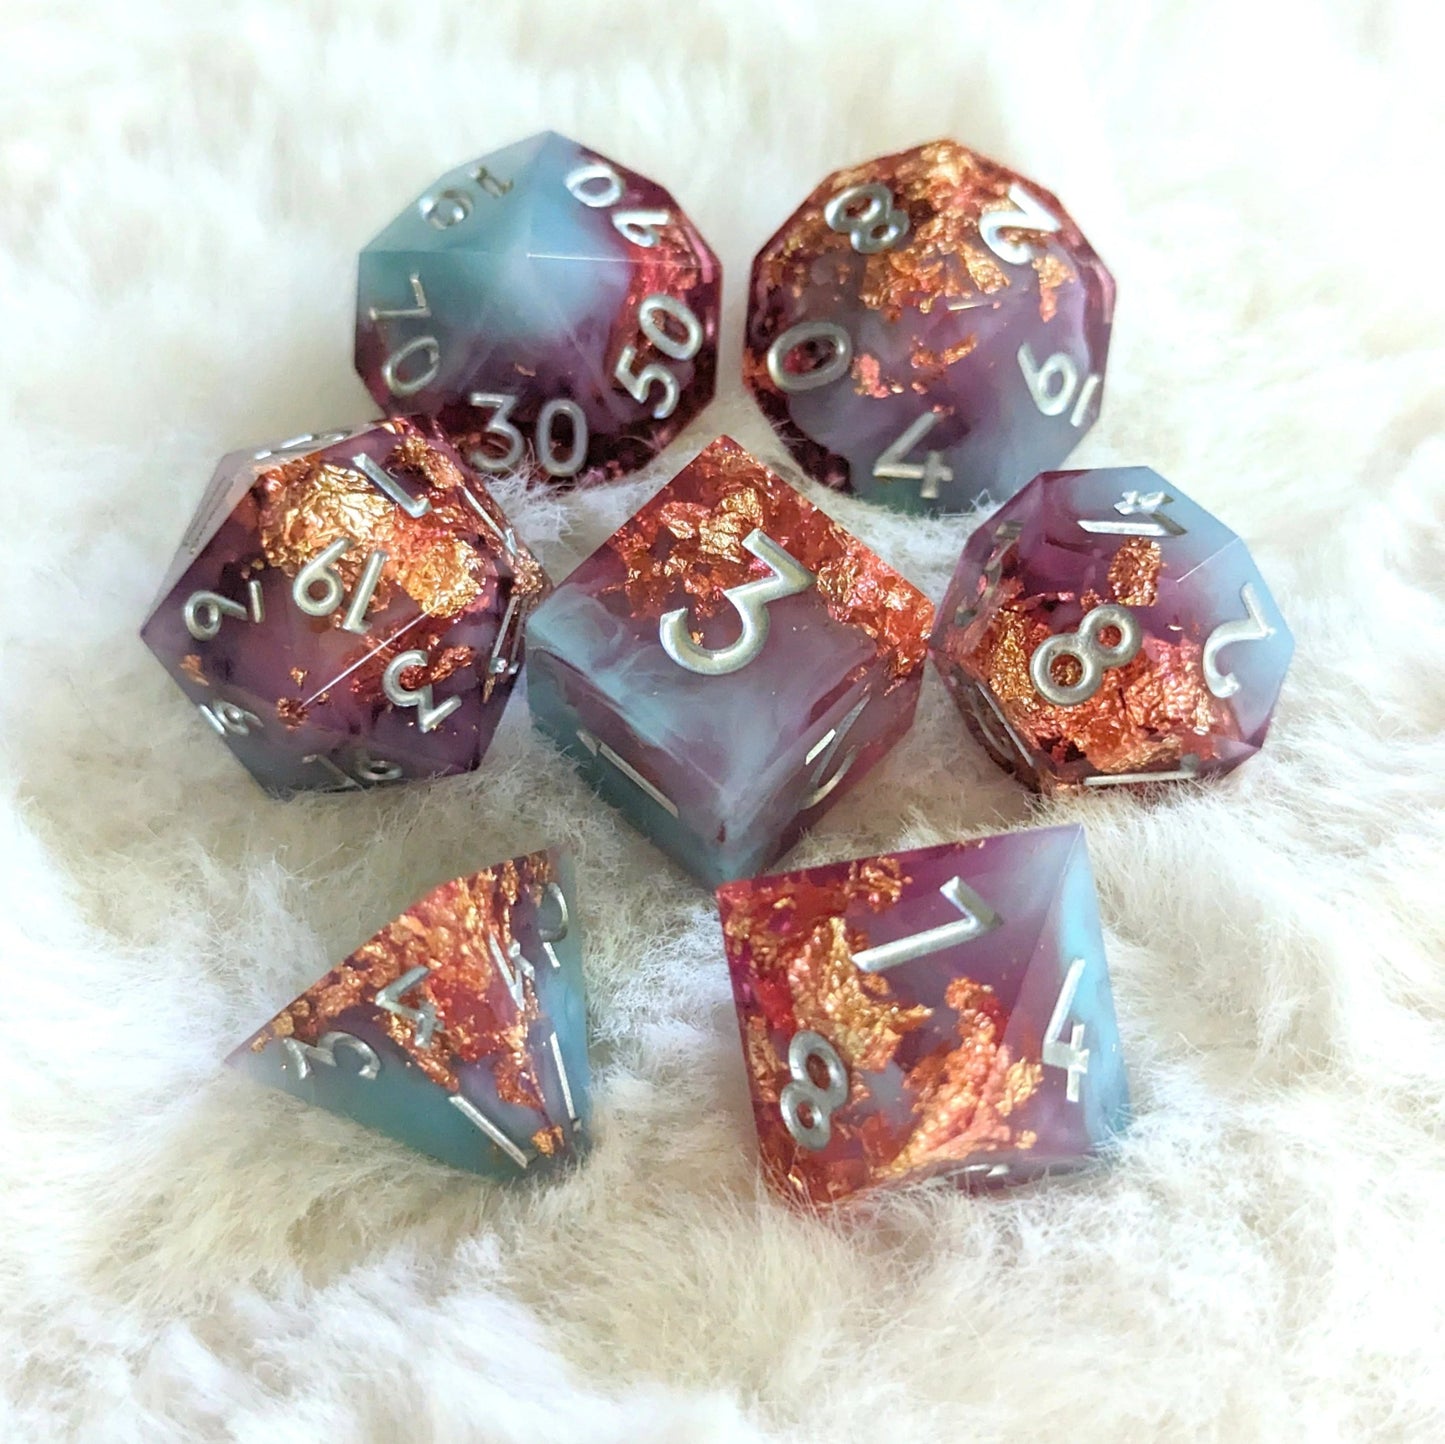 Misty Pools - 7 piece sharp-edge dice set - The Fourth Place